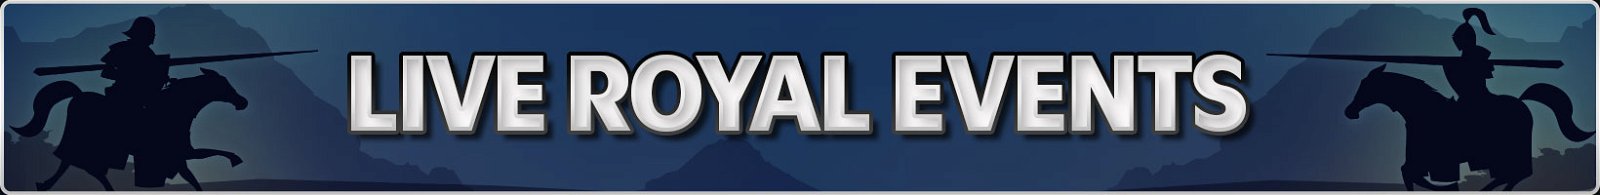 Live Royal Events